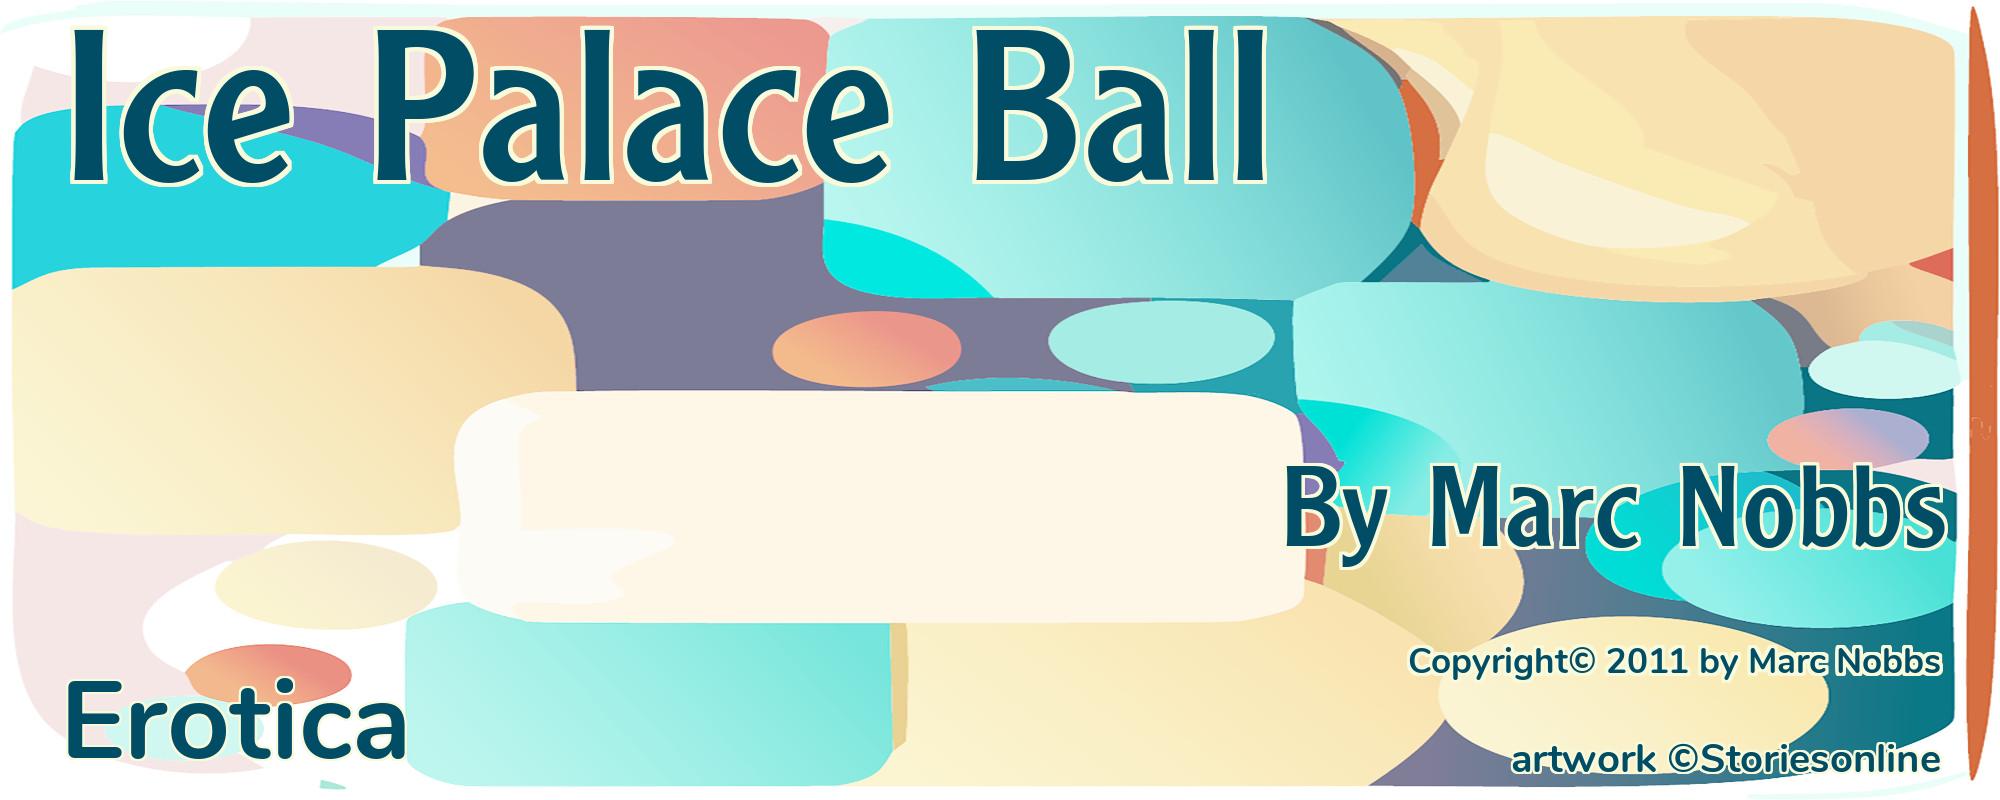 Ice Palace Ball - Cover